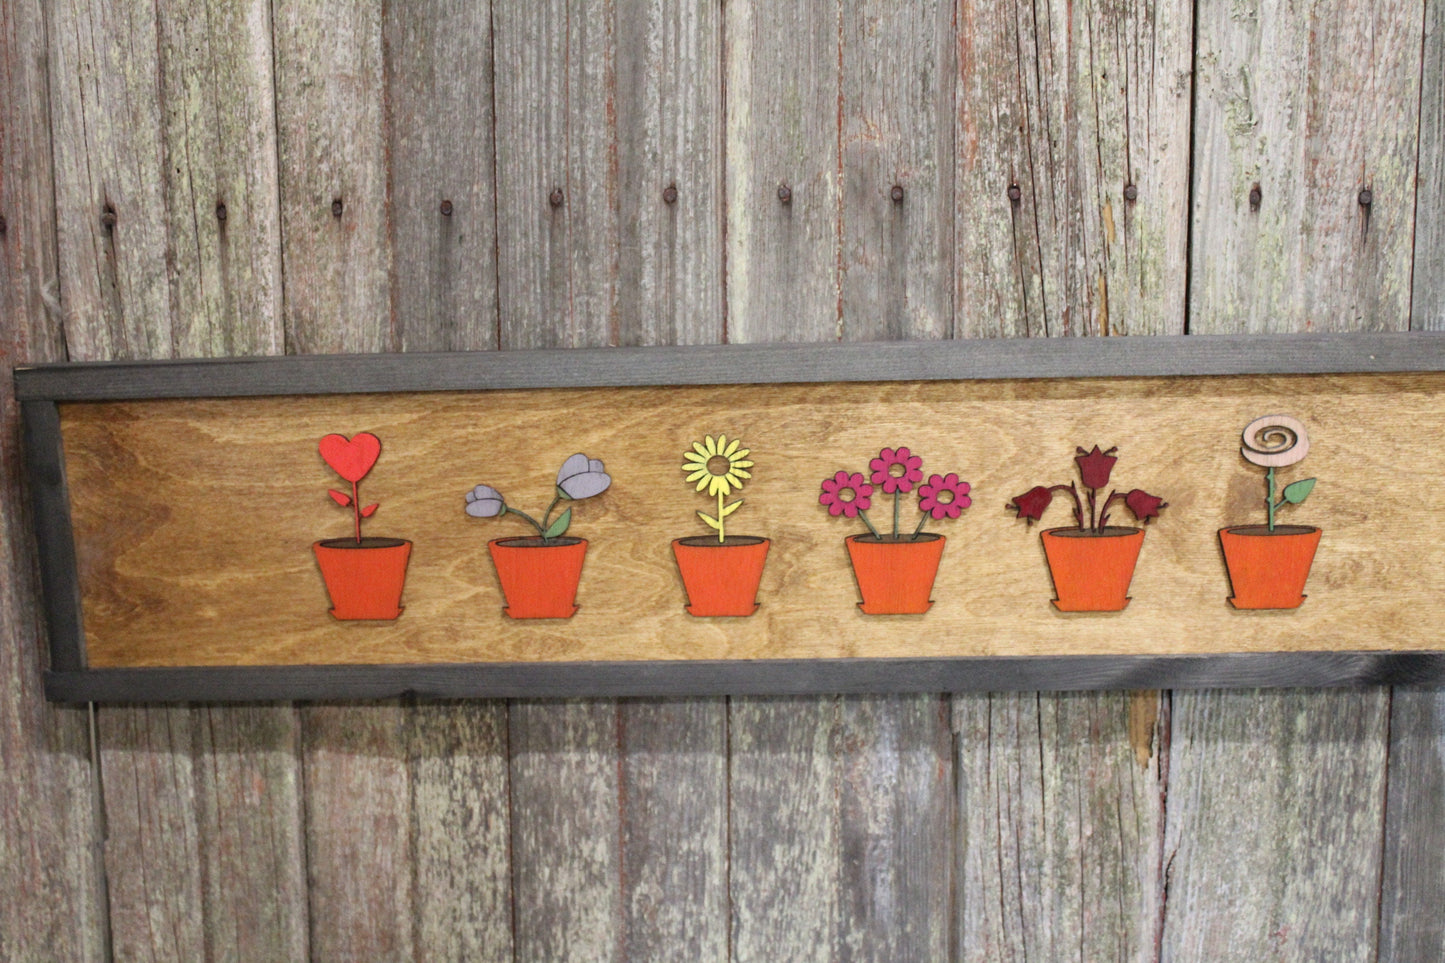 Flower Pot Flowers Floral Wood Décor Cartoon Wall Hanging Country Farmhouse Shabby Chic 3D Raised Image Daisy Heart Bloom Rustic Greenhouse